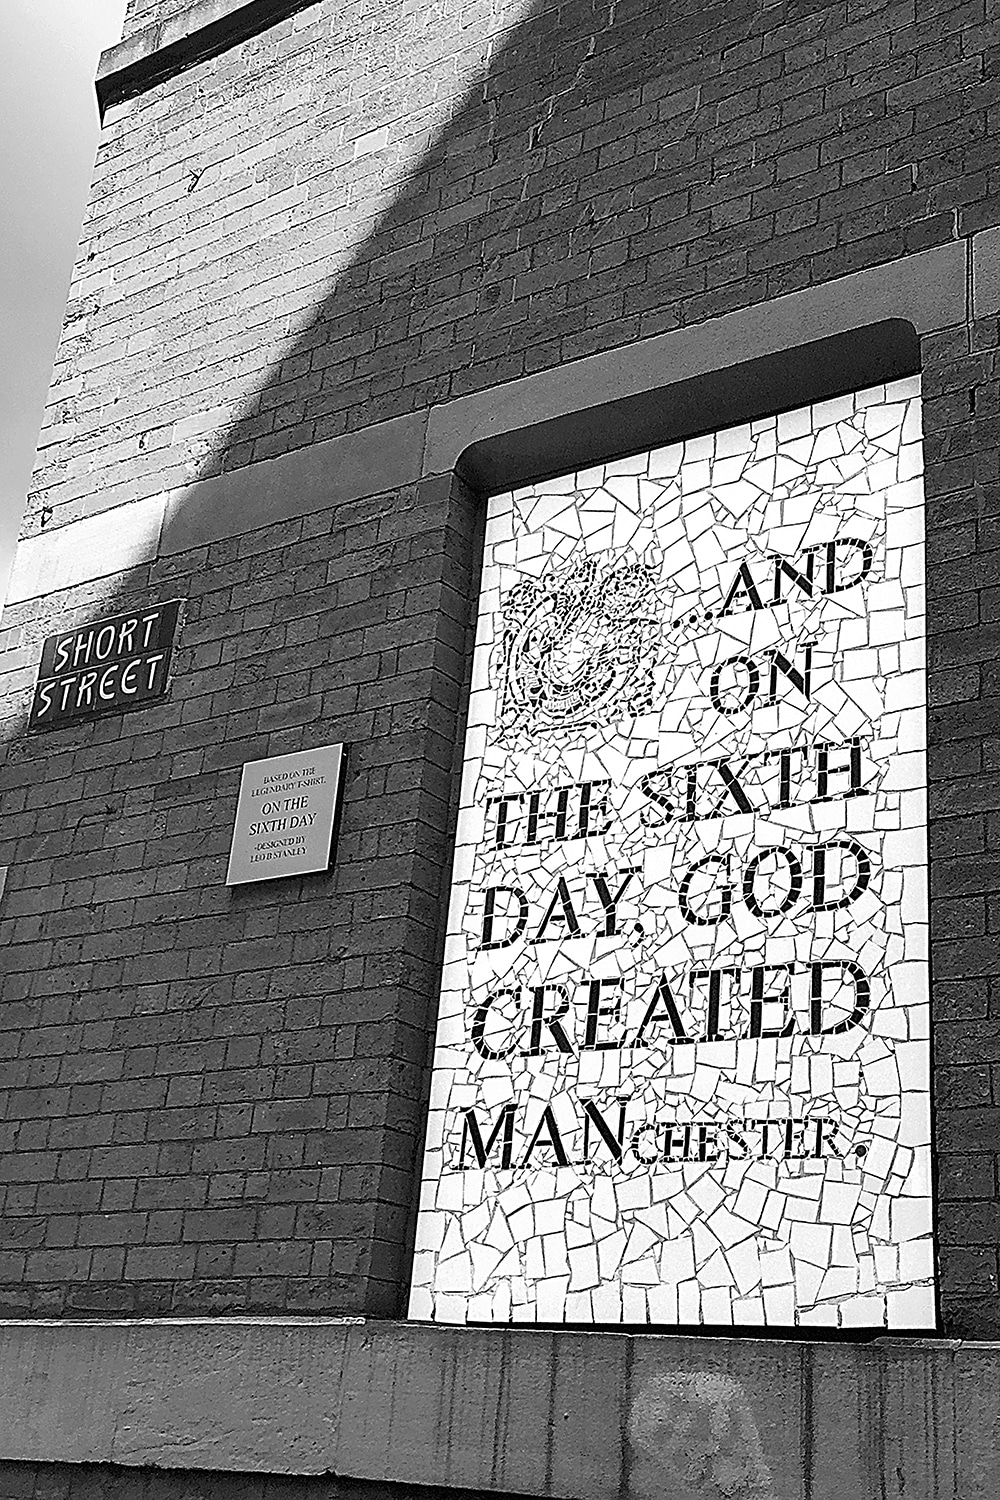 On the Sixth Day God Created Manchester Manchester Landscapes Afflecks